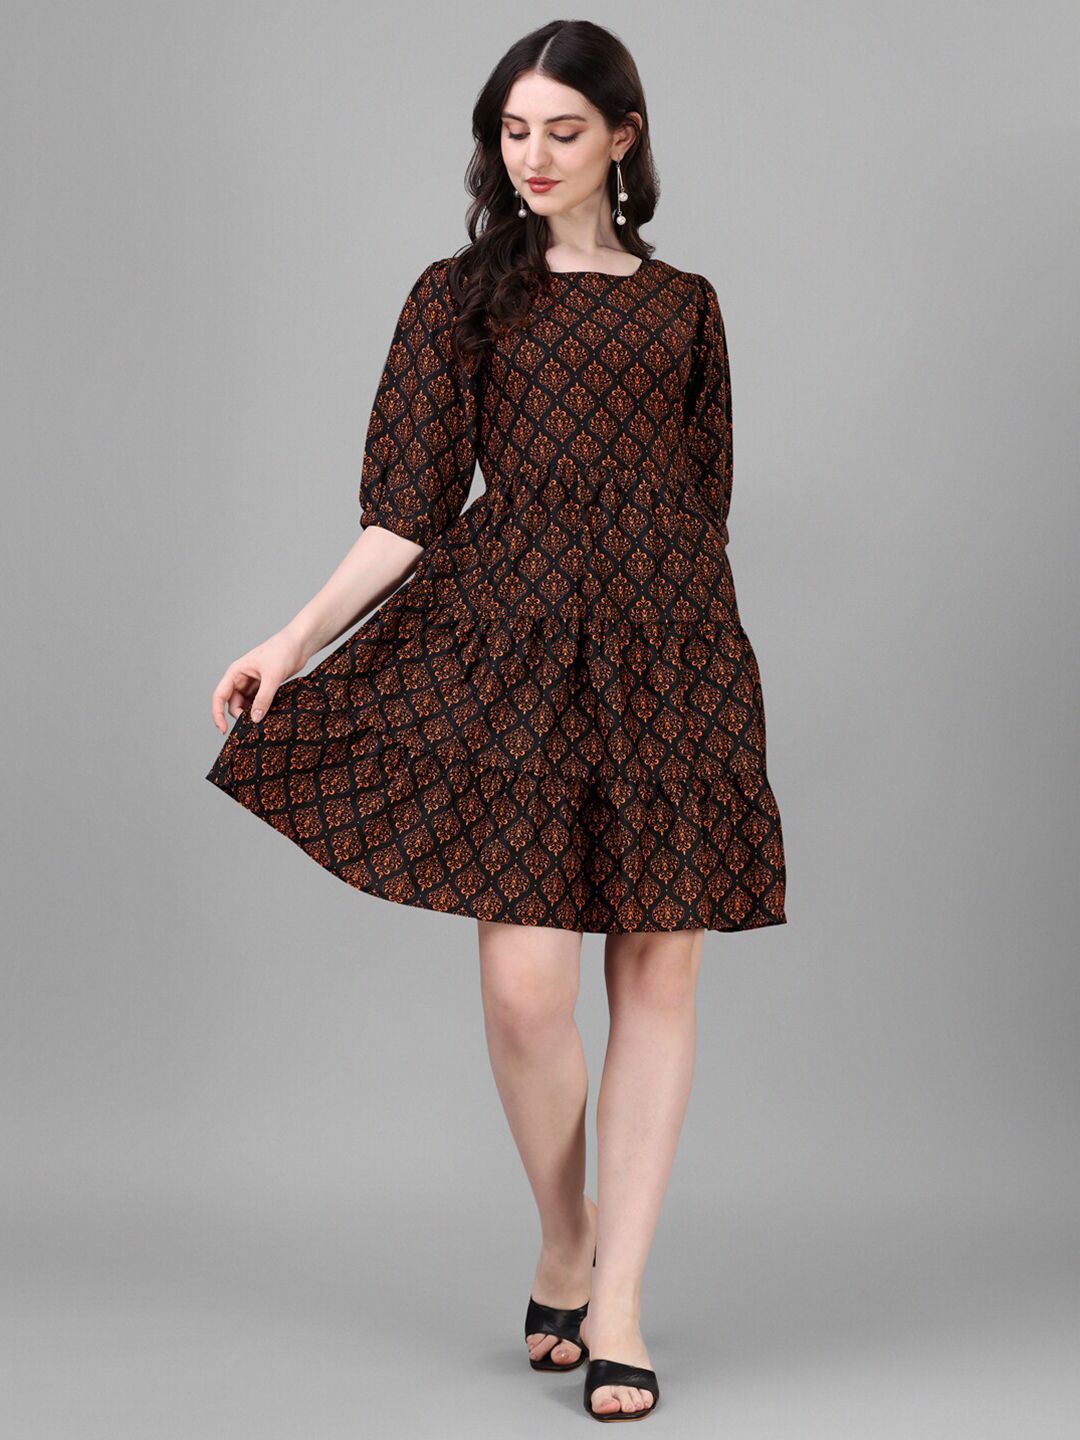 Kinjo Ethnic Motifs Printed A-Line Dress Price in India